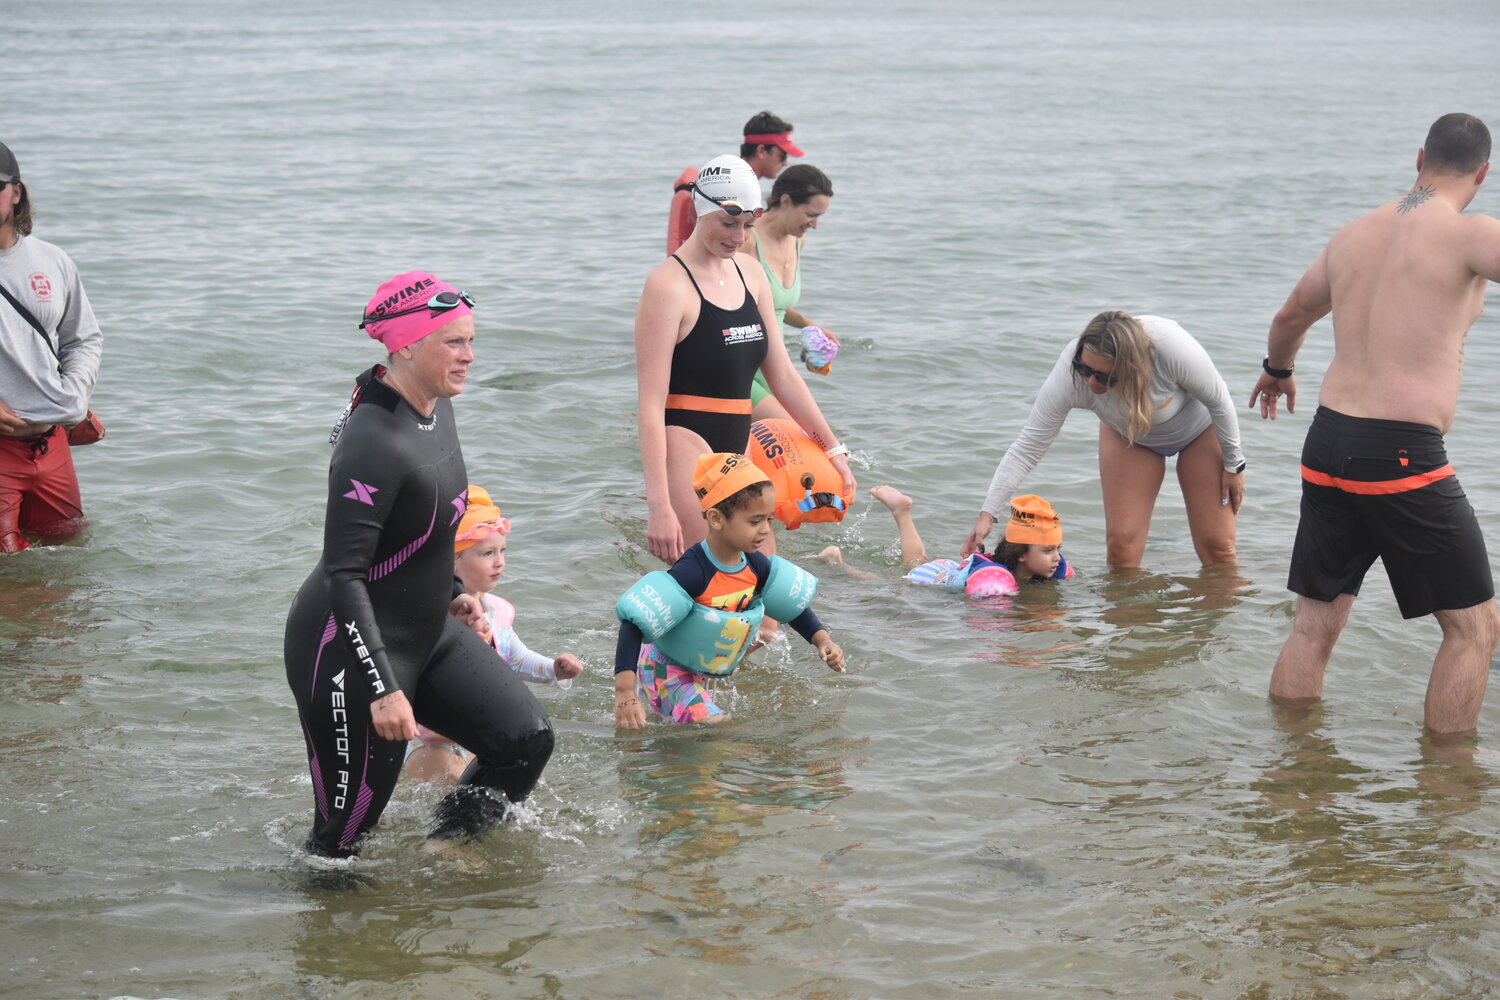 Saturday's Swim Across America-Nantucket open water swim at Jetties Beach raised $650,000 to benefit on-island cancer services.